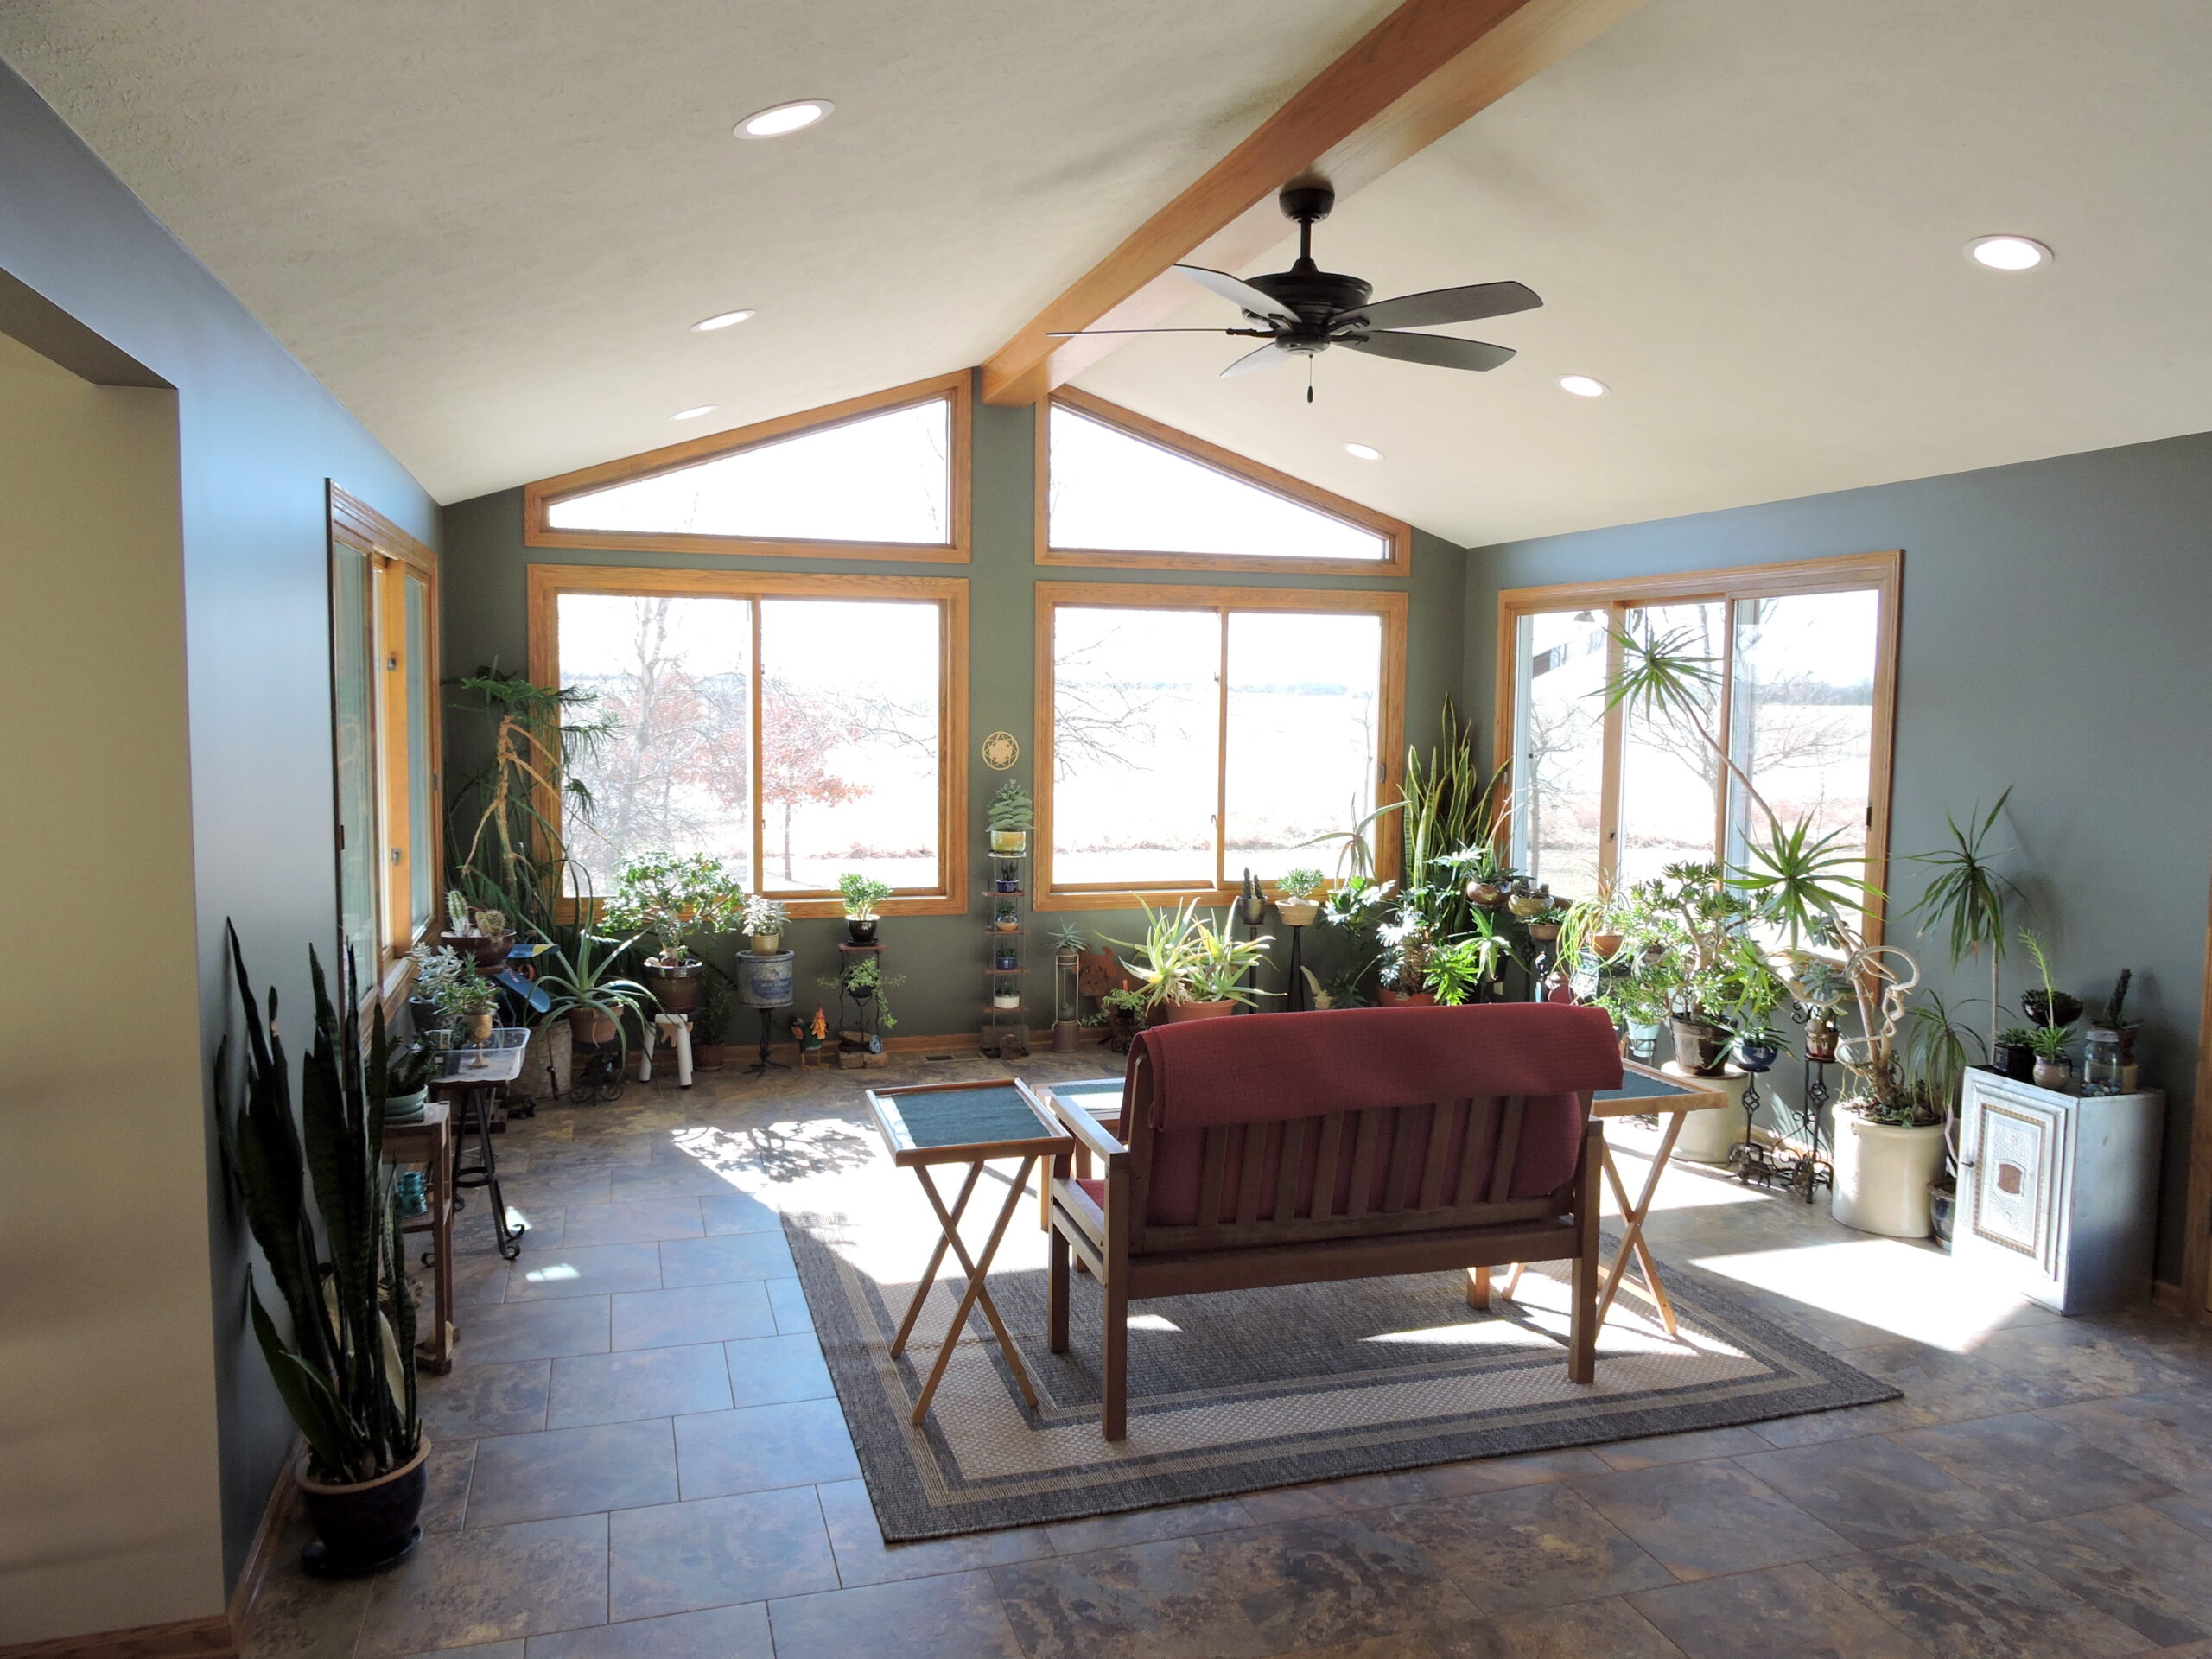 Sunroom addition with large windows and ceiling fan